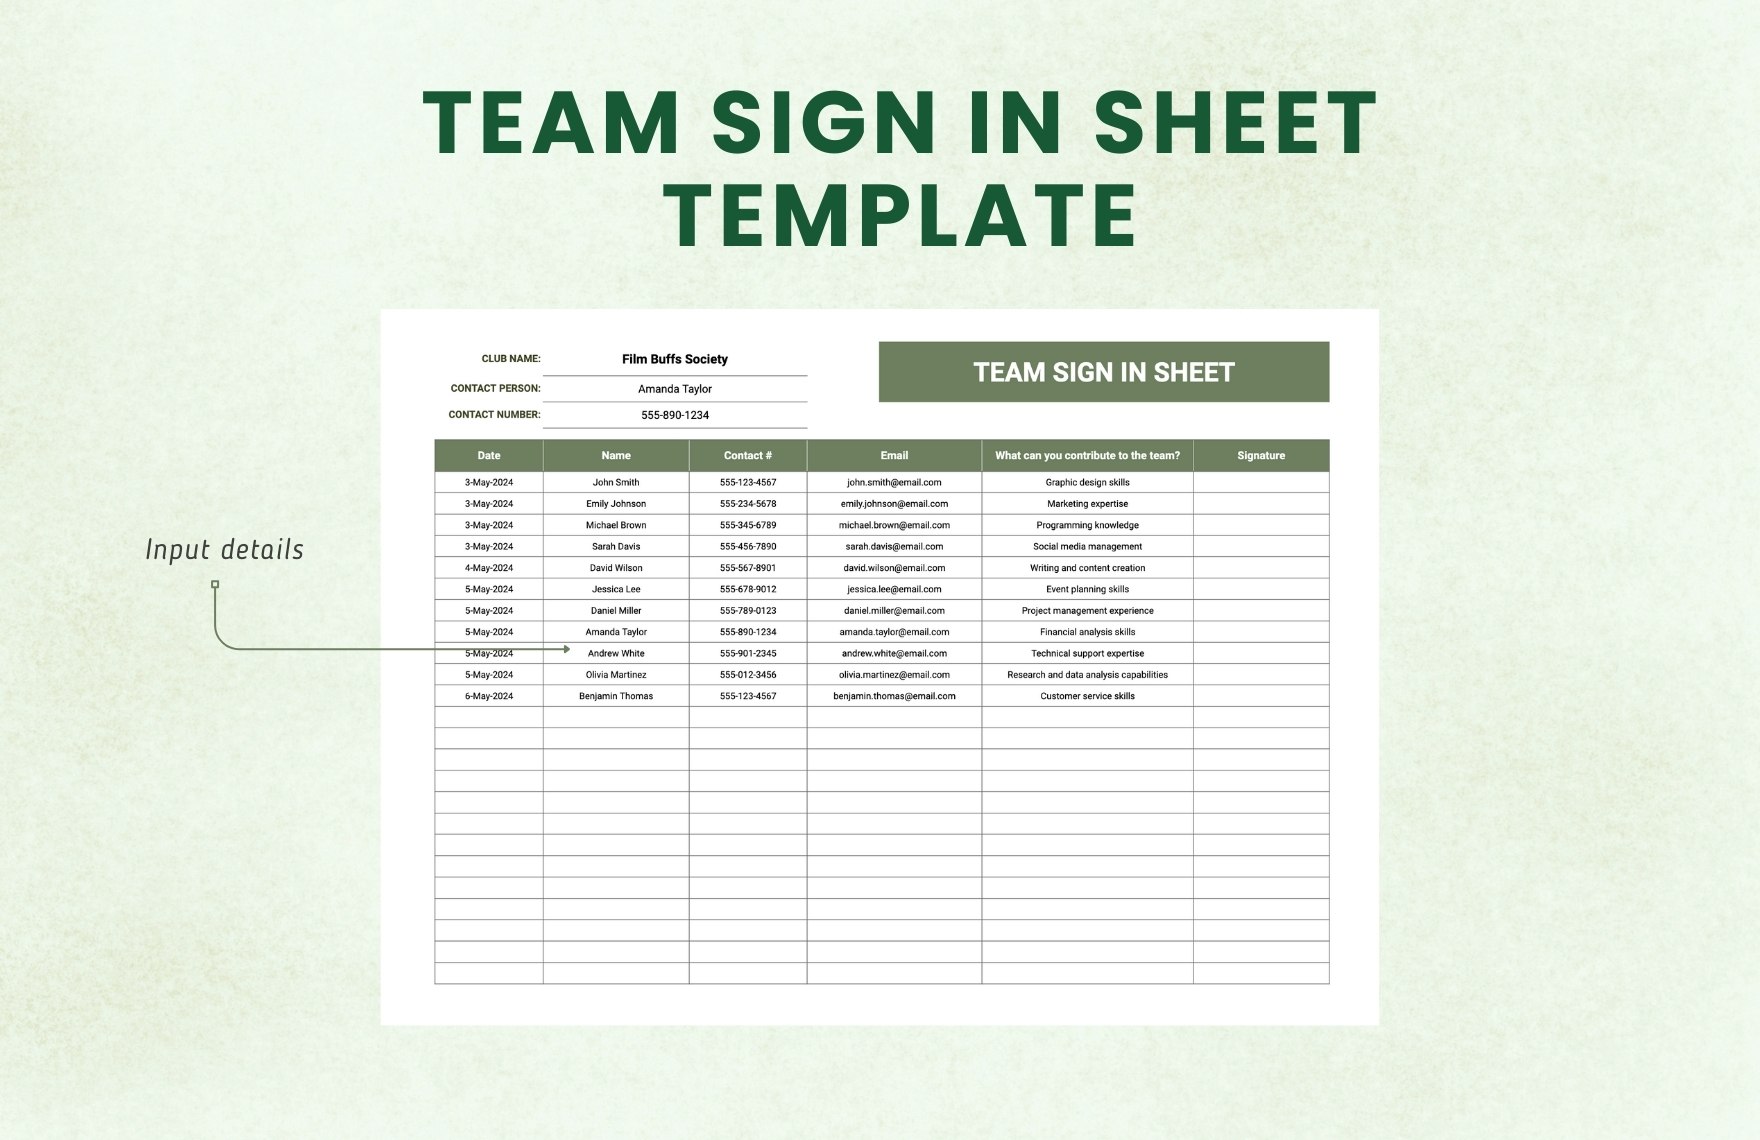 Team Sign in Sheet Template